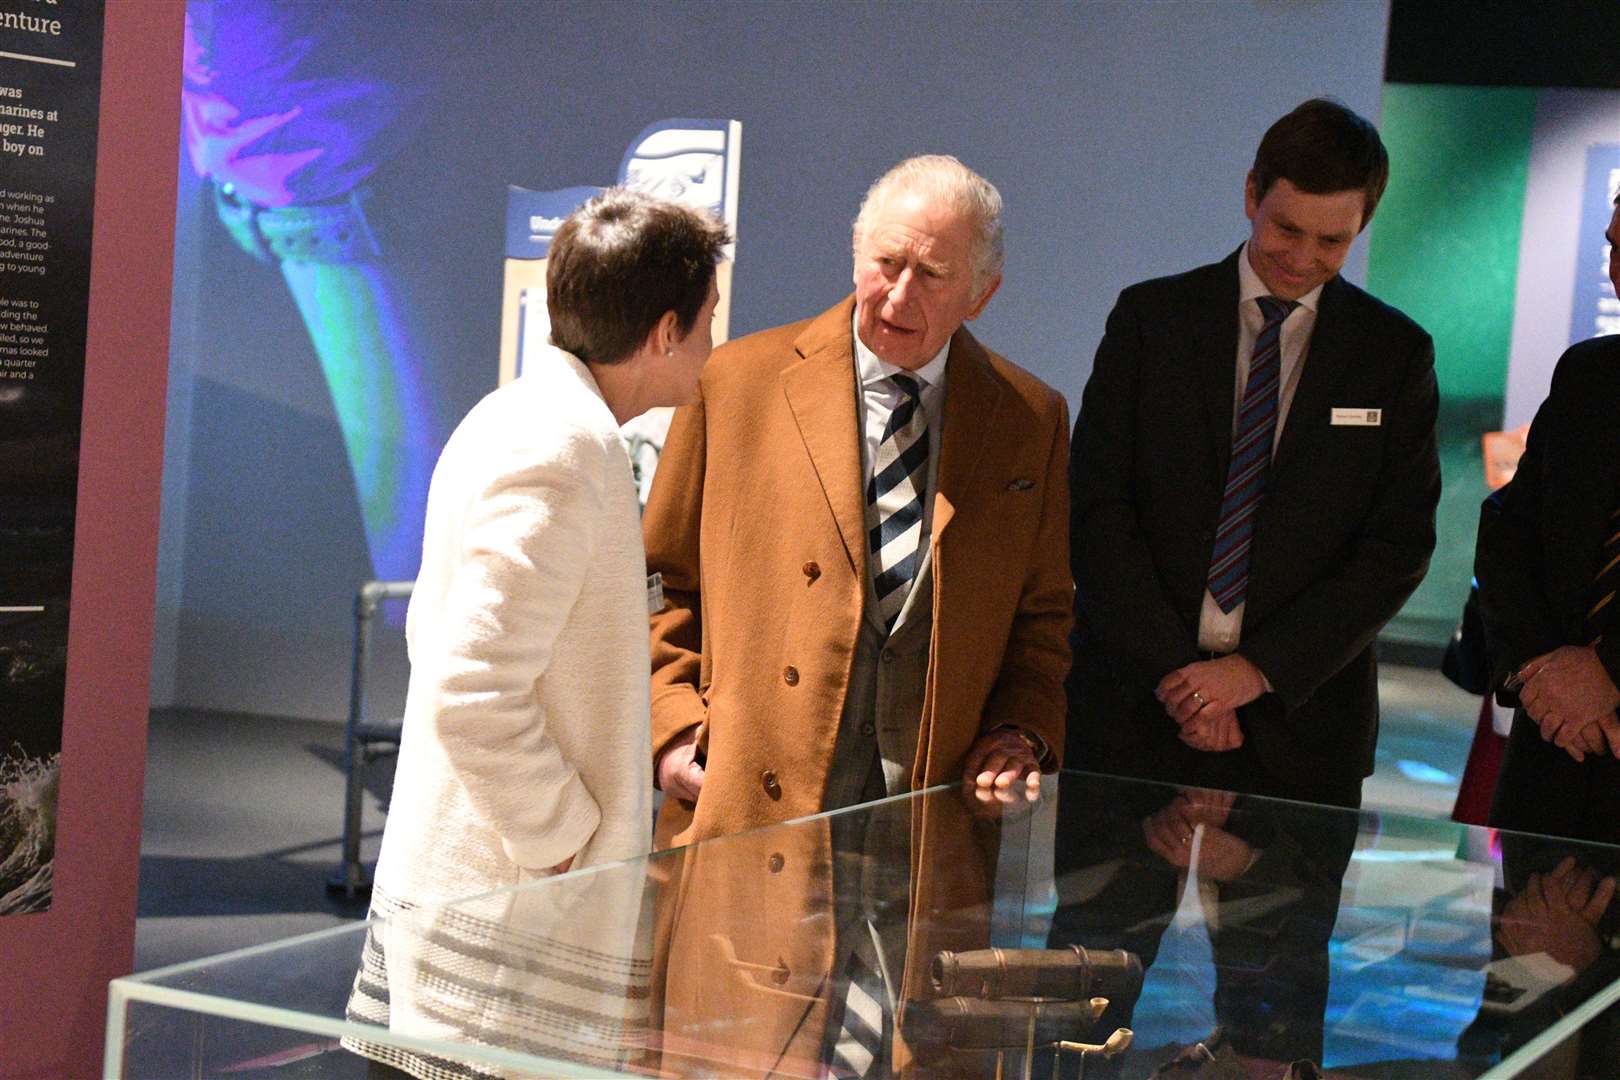 HRH touring the Diving Deep : HMS Invincible 1744 exhibition and meeting volunteers involved in the project. Picture: Barry Goodwin